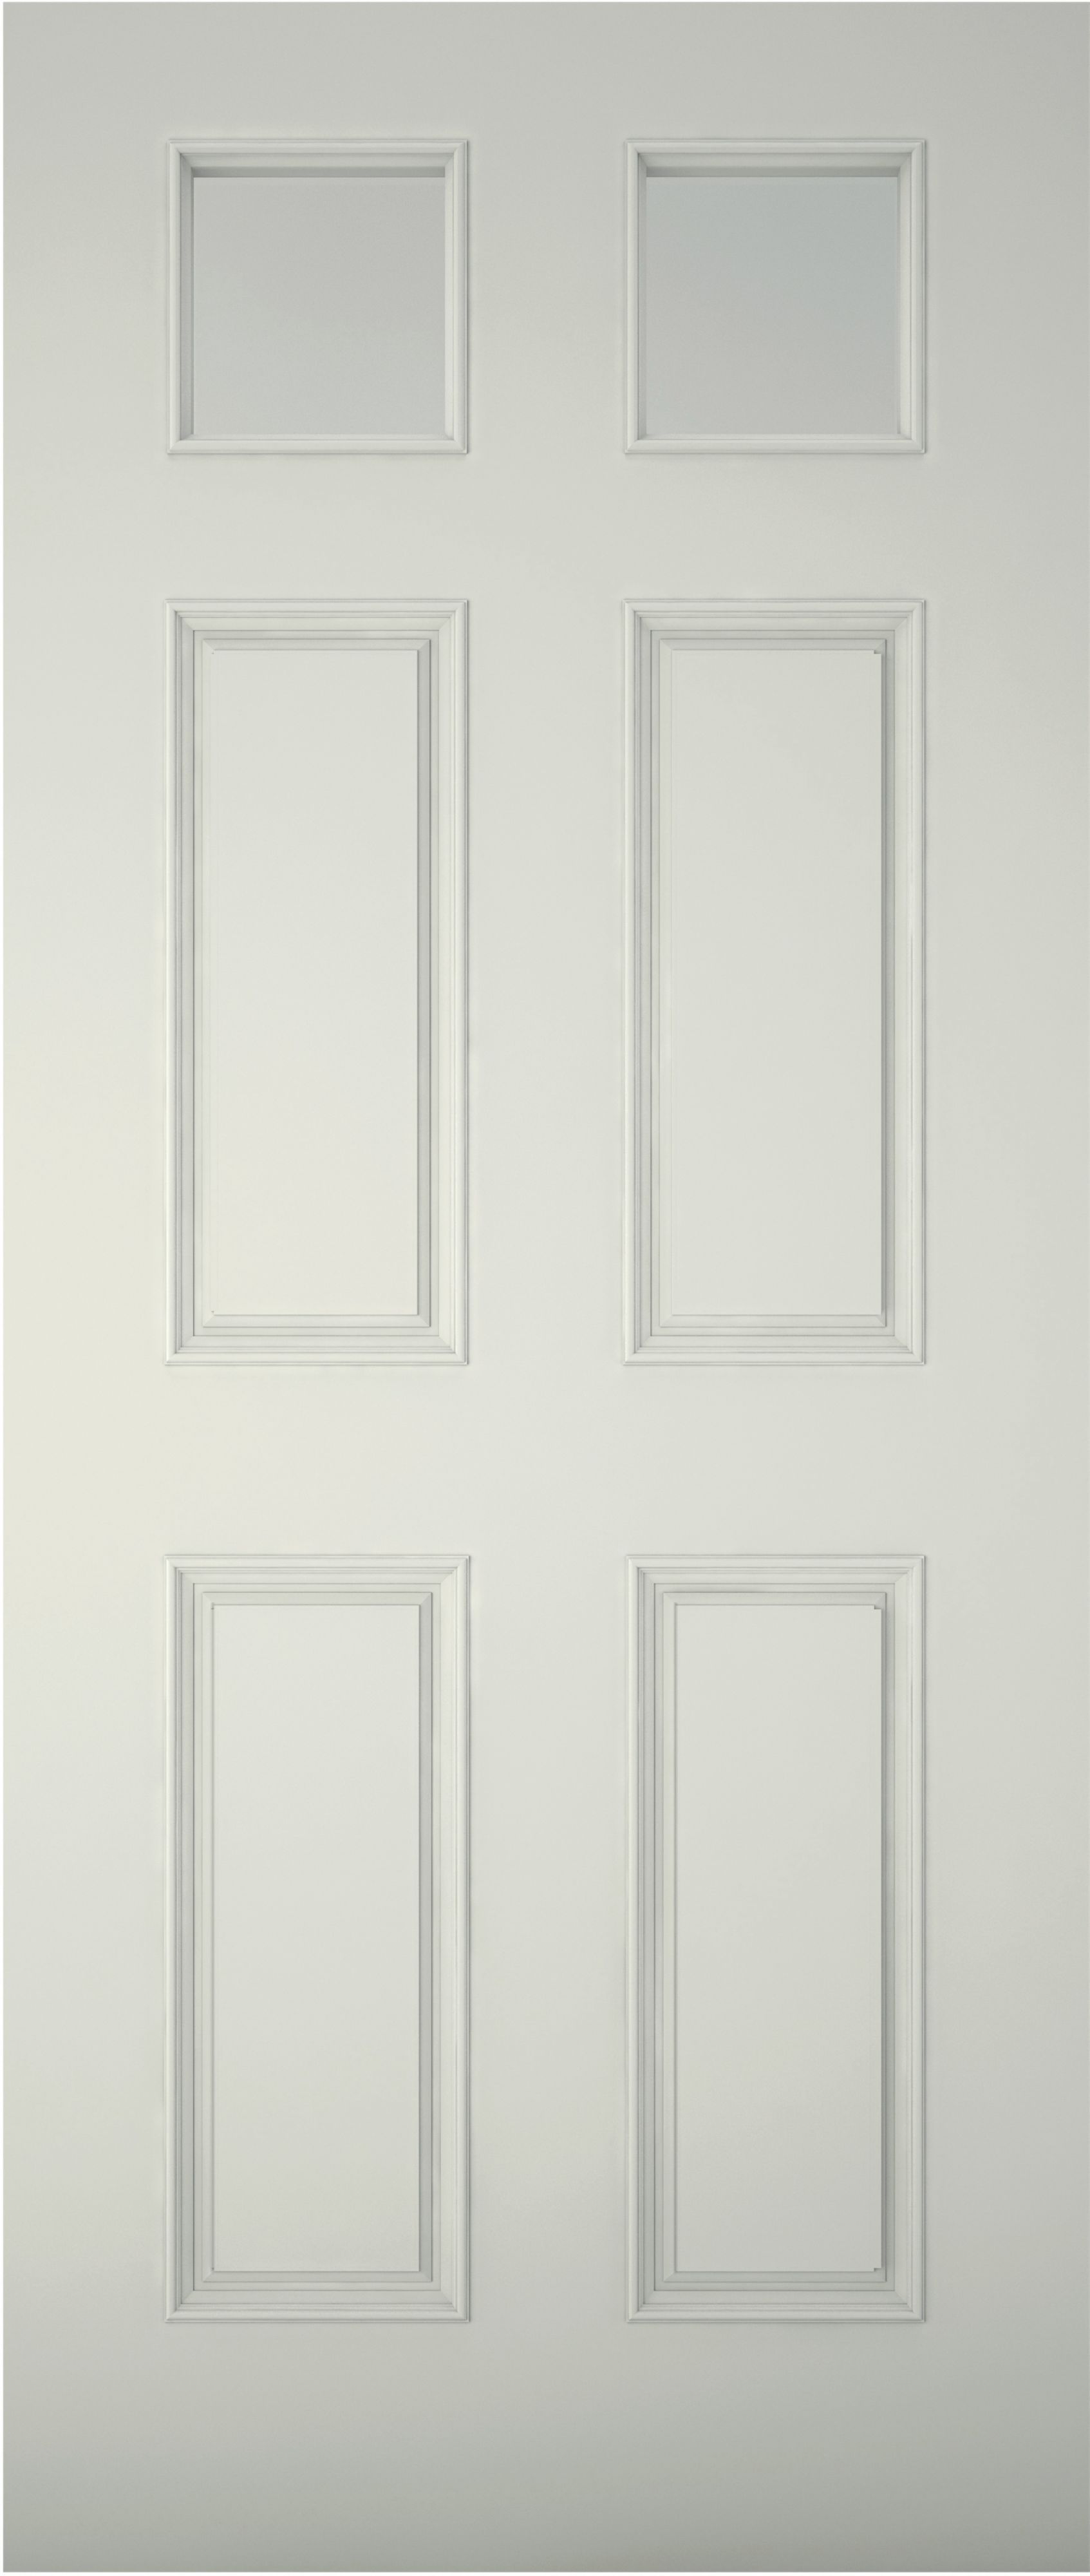 6 panel Frosted Glazed White LH & RH External Front Door set & letter plate, (H)2074mm (W)932mm